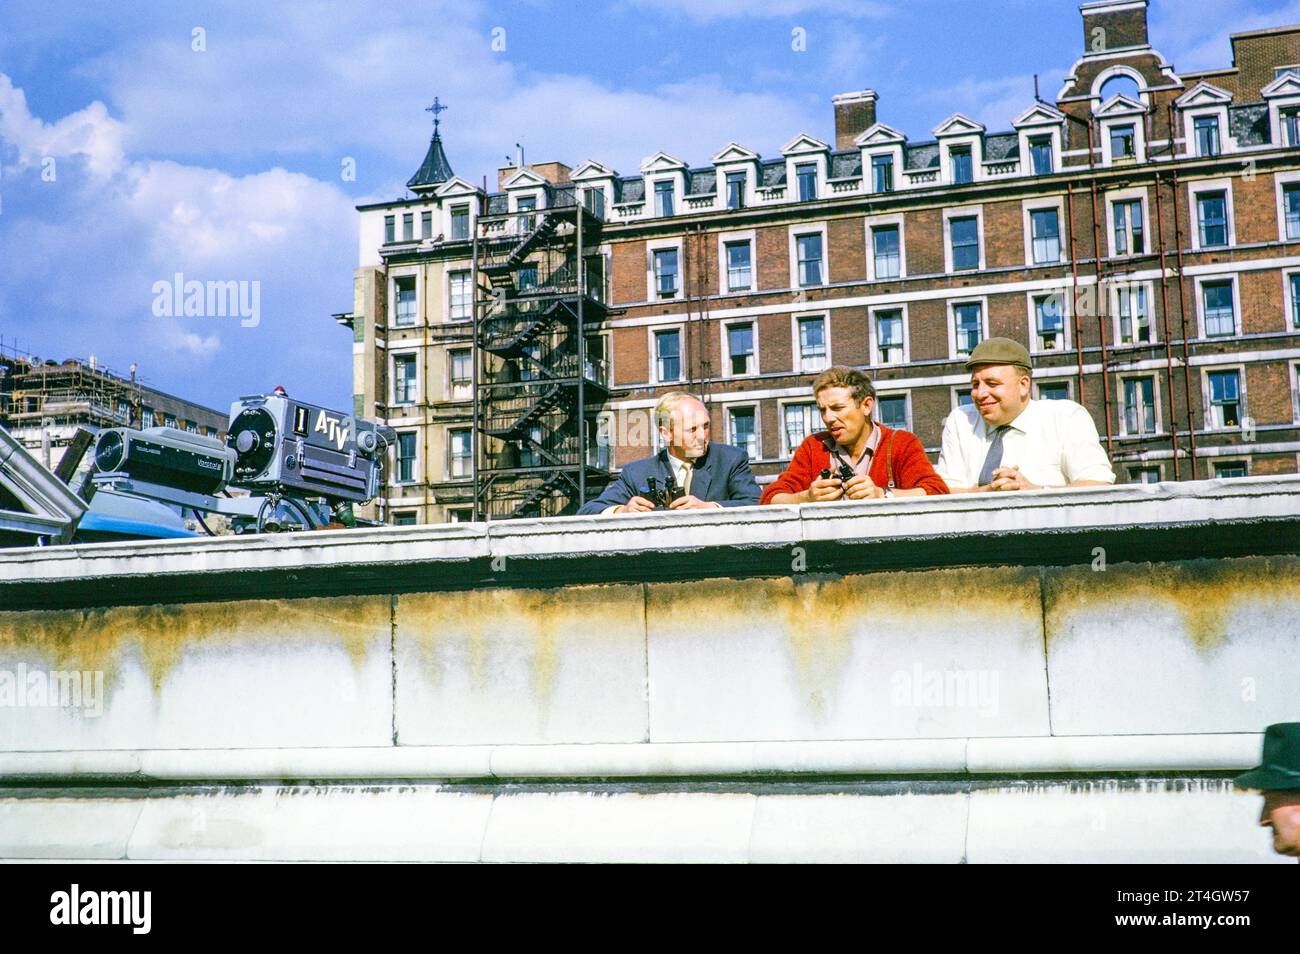 ATV outside TV broadcast, Telstar satellite launch, Westminster Bridge, London, England, UK, July 1962, Mike Whitcutt cameraman, Phil Comber rigger, 'Tiny' Crane vision engineer. Photograph by Alan 'Taffy' Harries Stock Photo